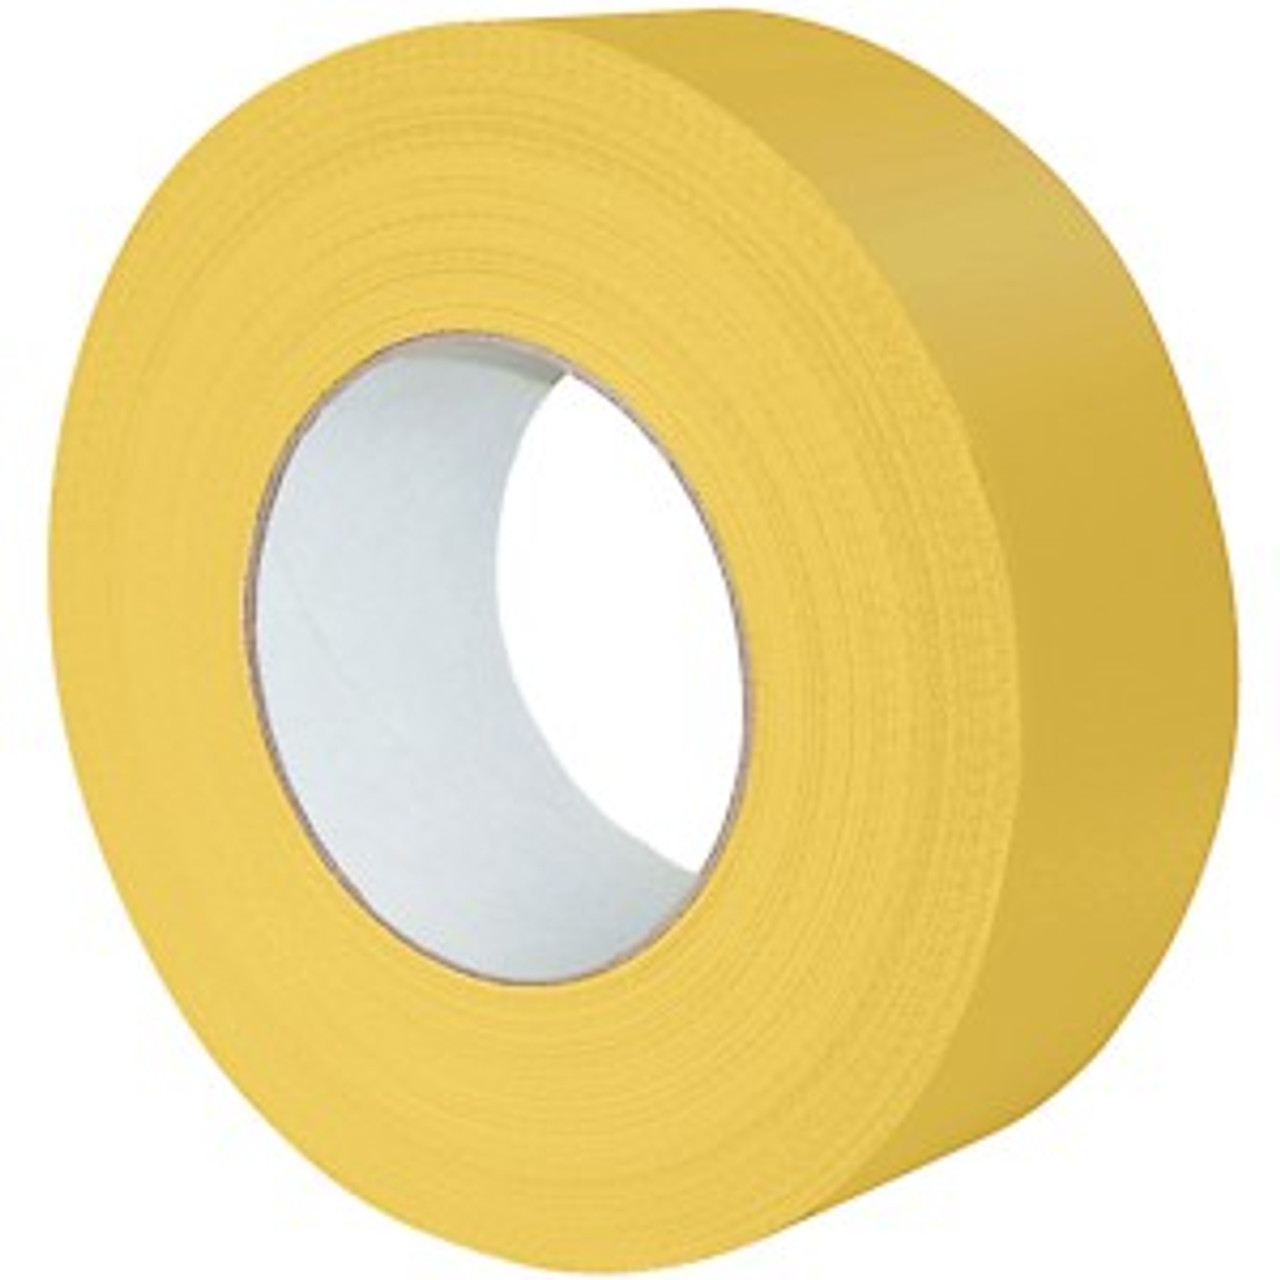 Yellow Duct Tape 48mmx55m 24rolls /case